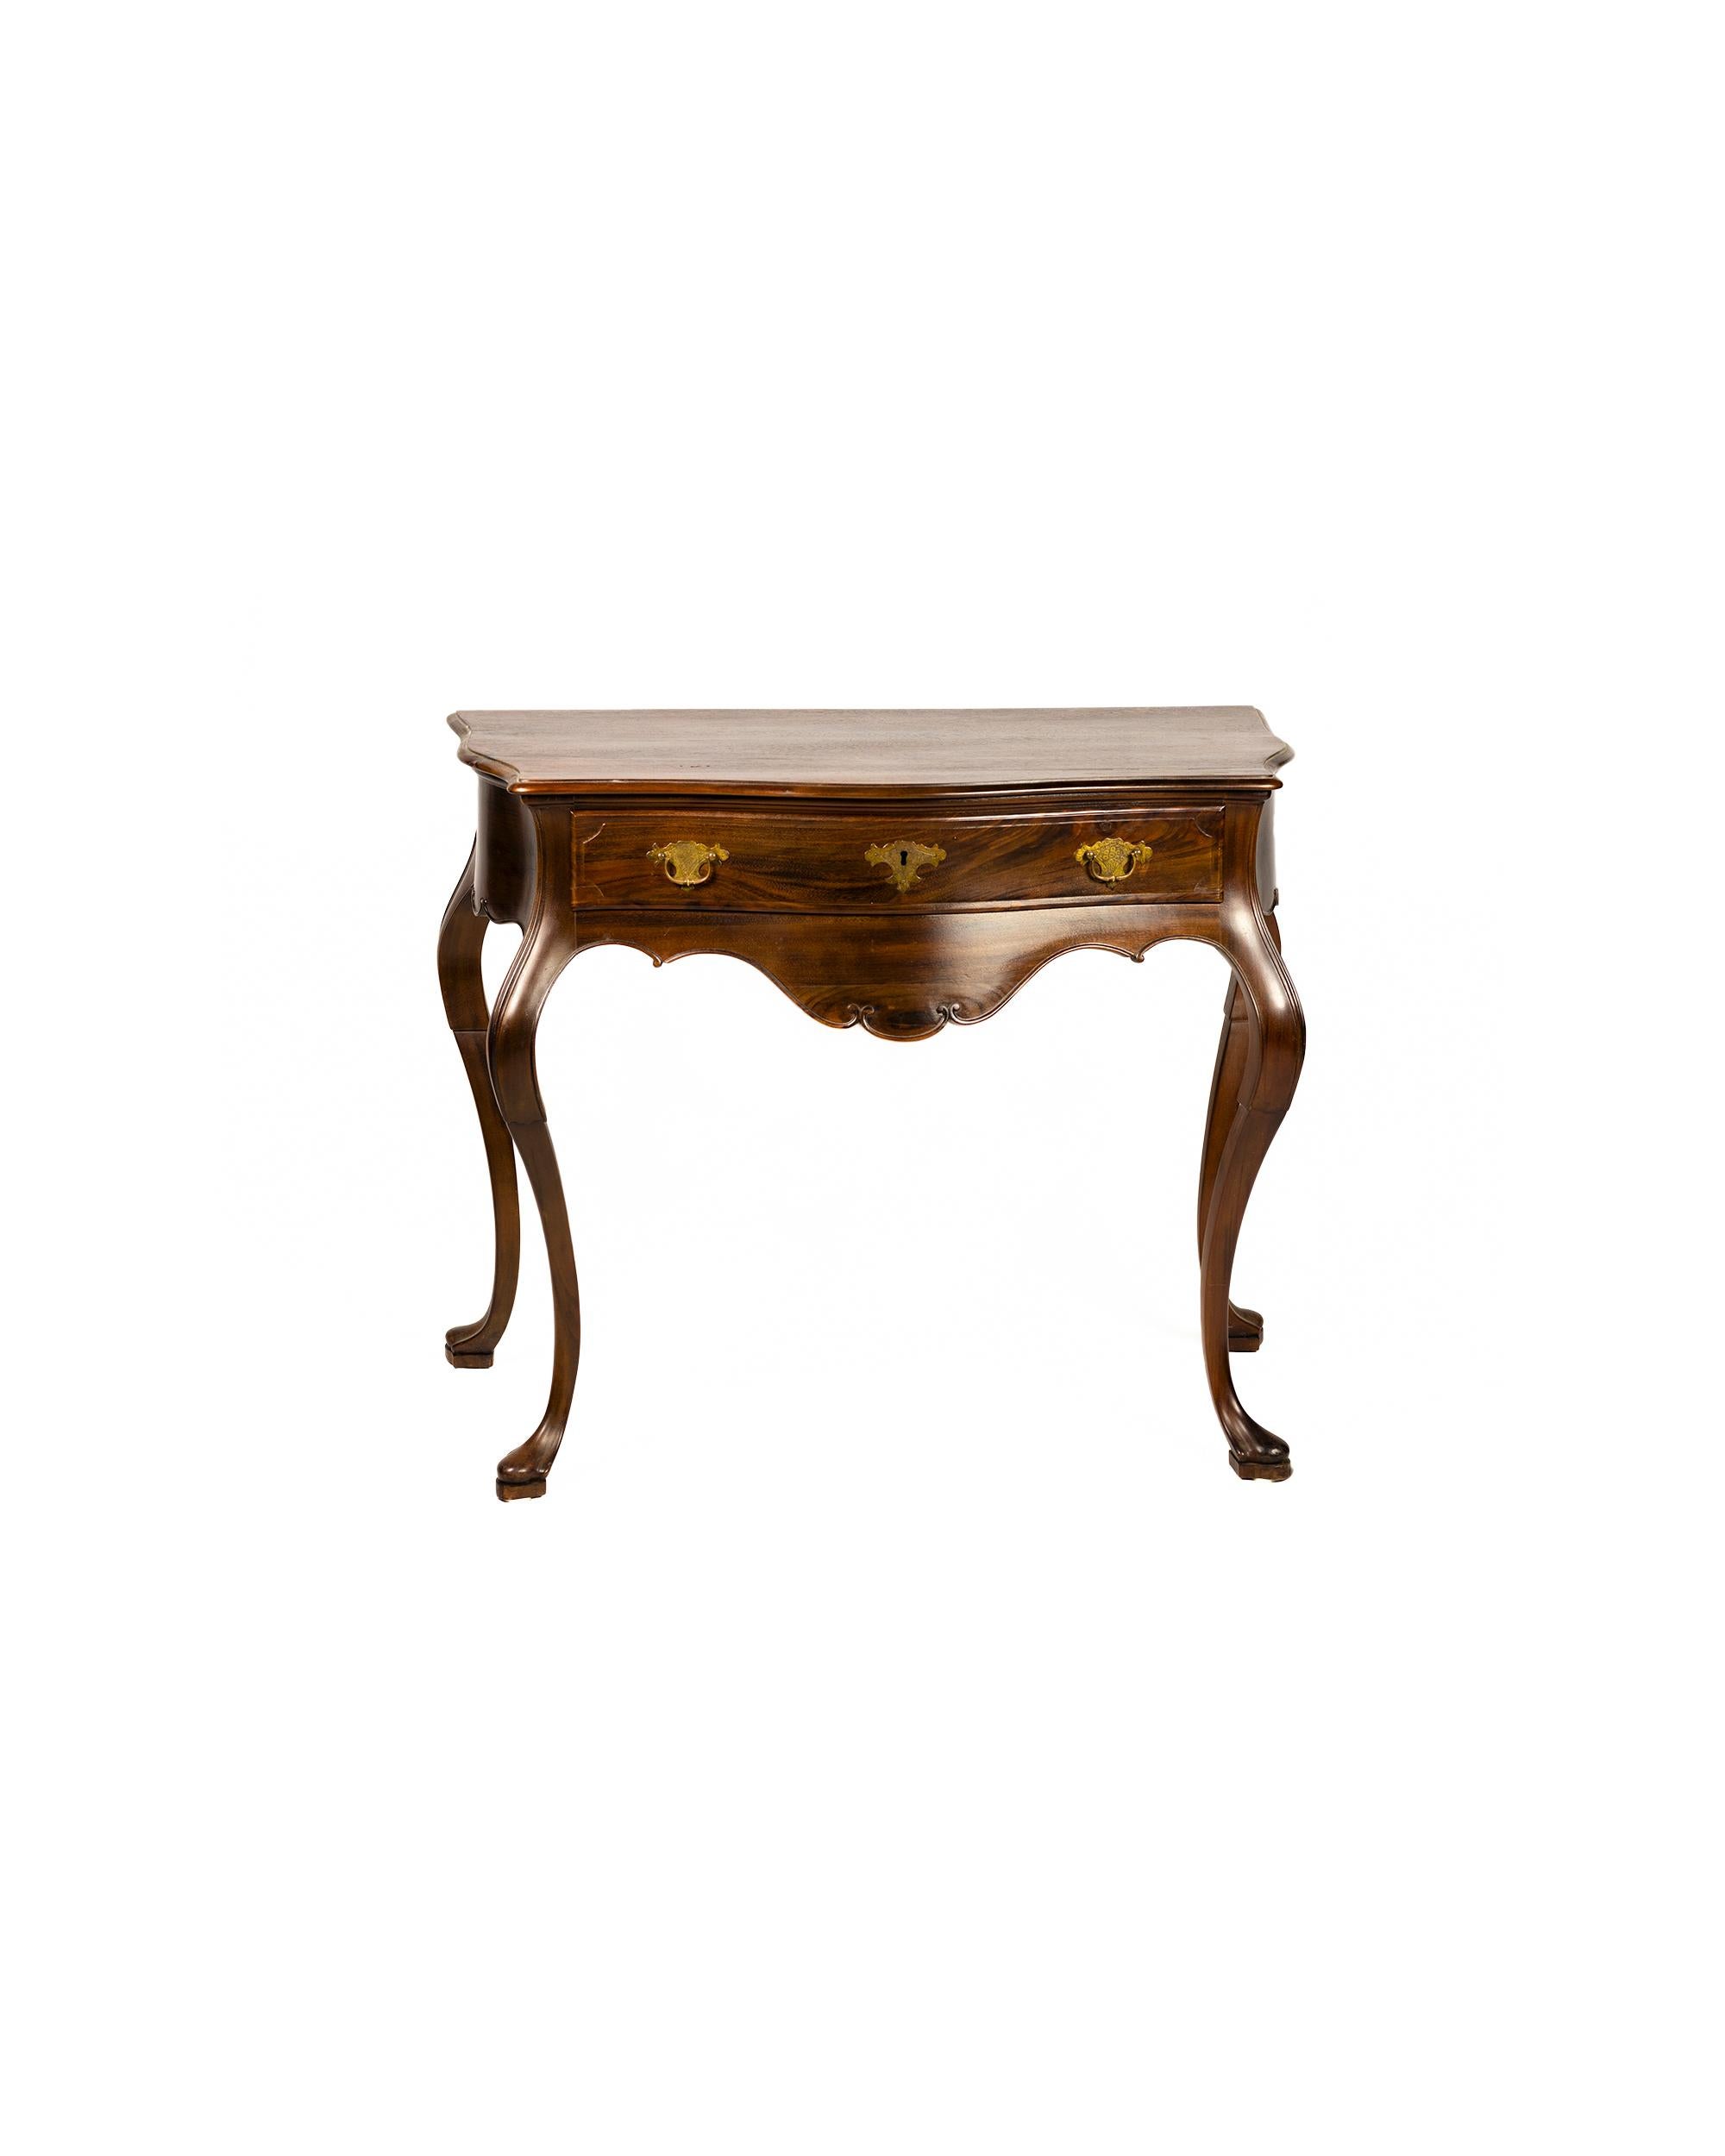 A Portuguese Baroque styled high-end wood single drawer table commode with cut-out top following the lines of the waist and framed by a recess, curved waist, scalloped and notched skirt, curved legs  ending in shoe or pipe feet and brass hardware. 